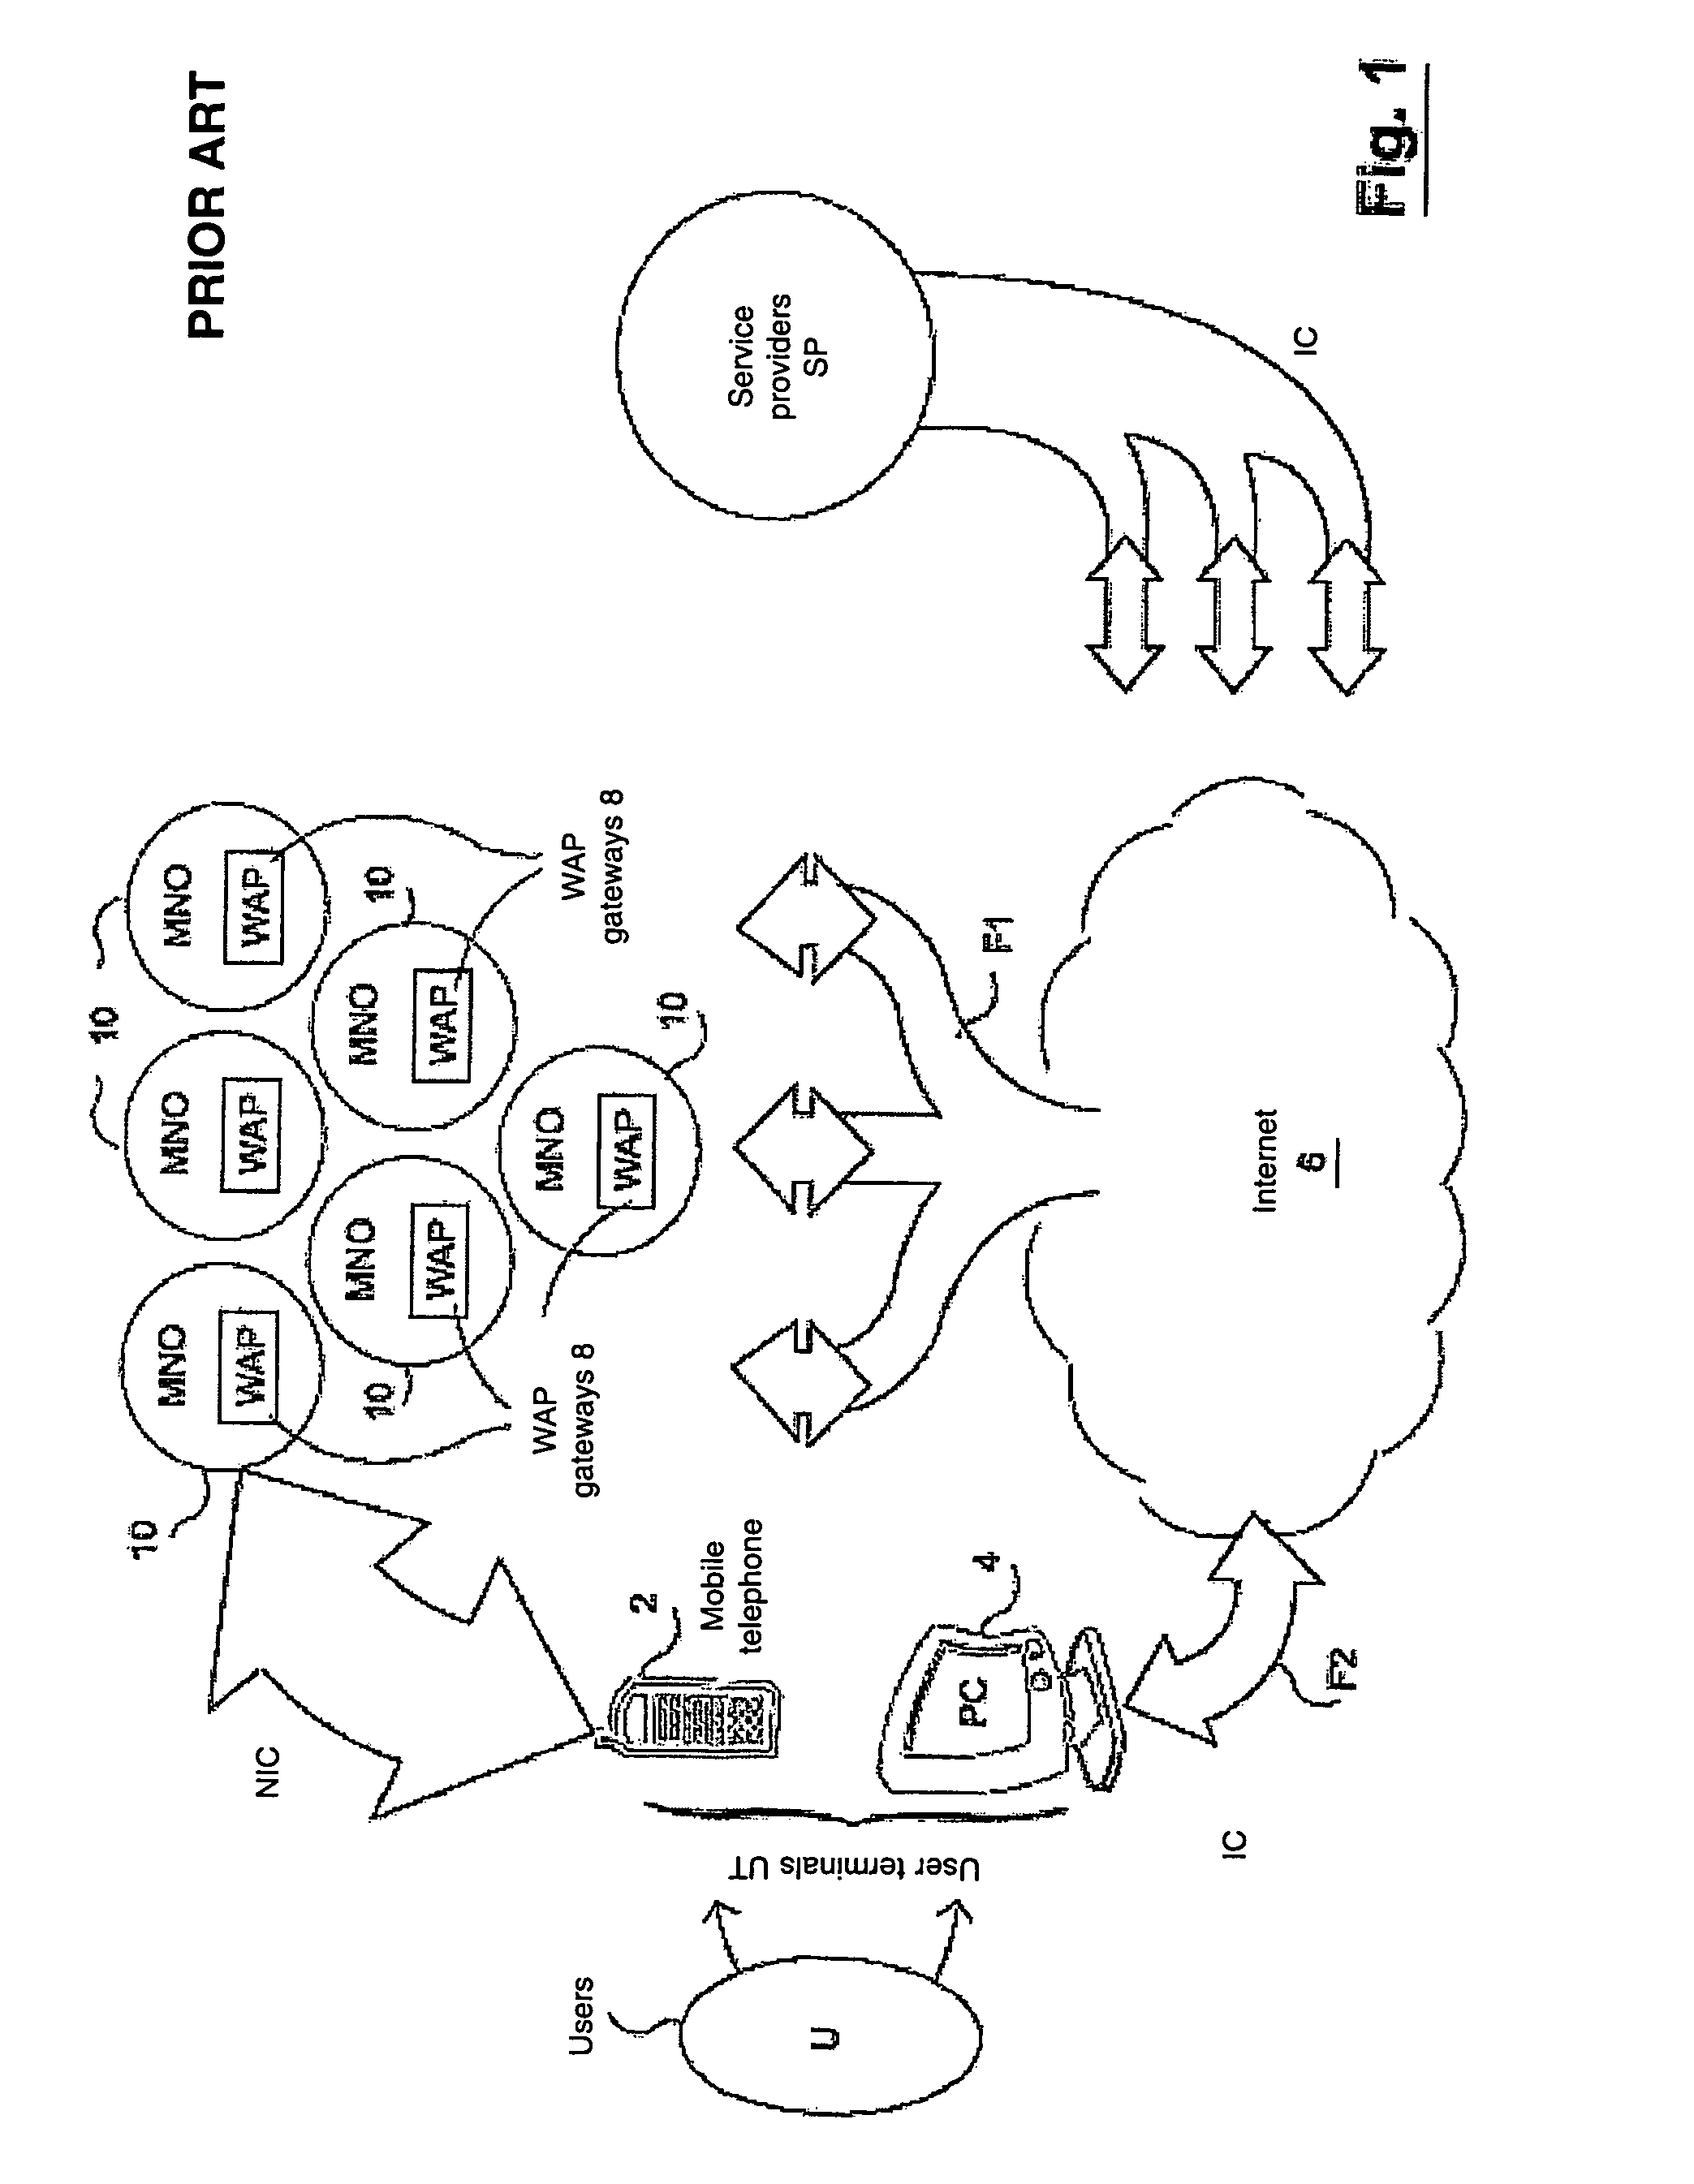 Method and apparatus for intermediation between service providers and services users